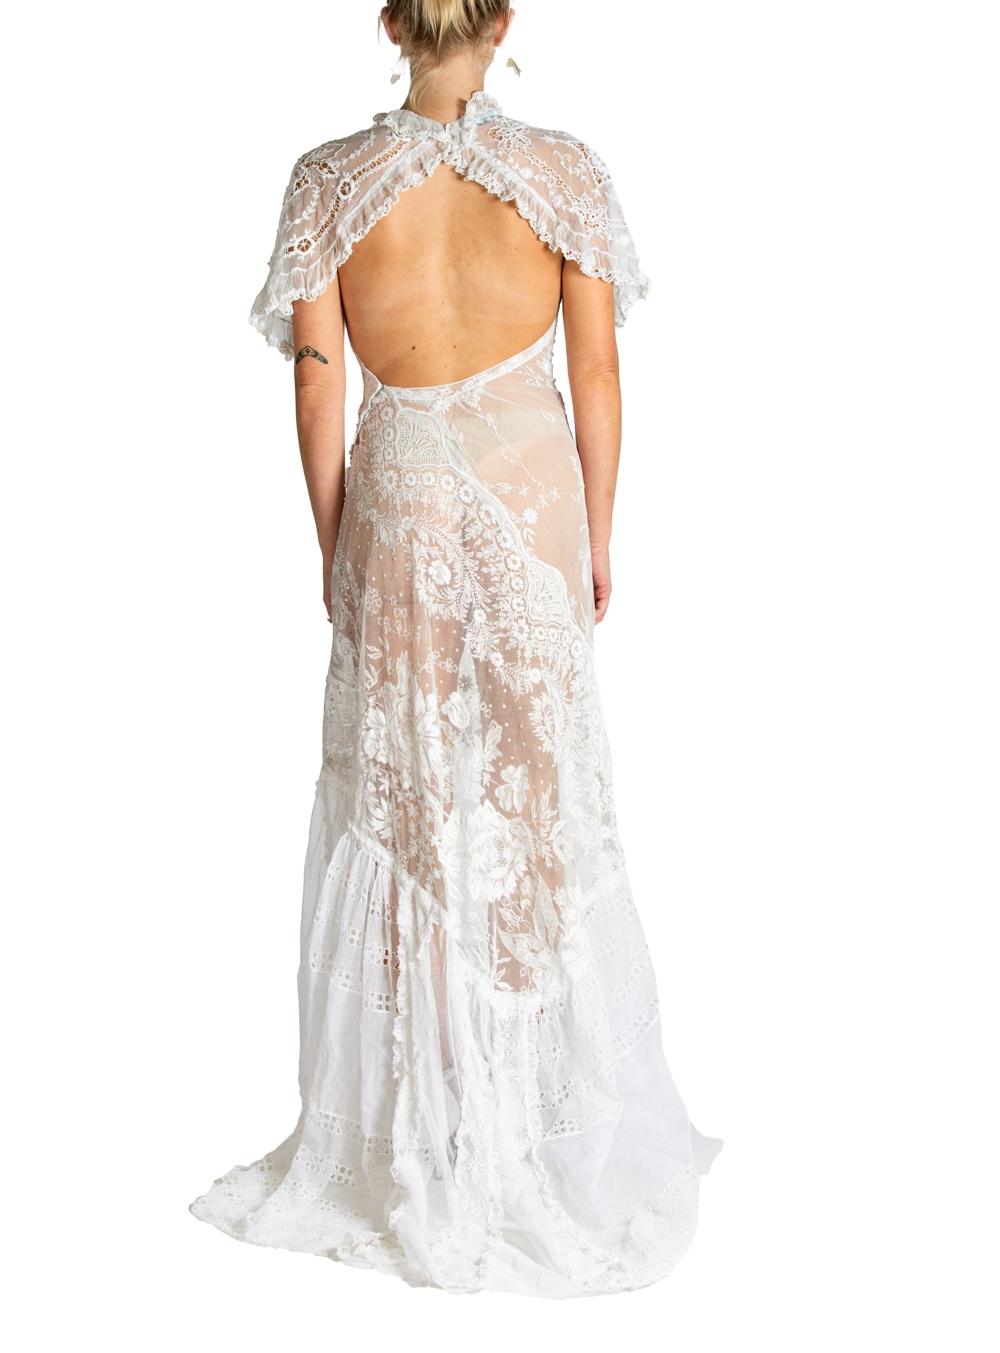 MORPHEW ATELIER White Cotton Embroidered Antique Net Lace Gown With Cut-Out Back For Sale 5